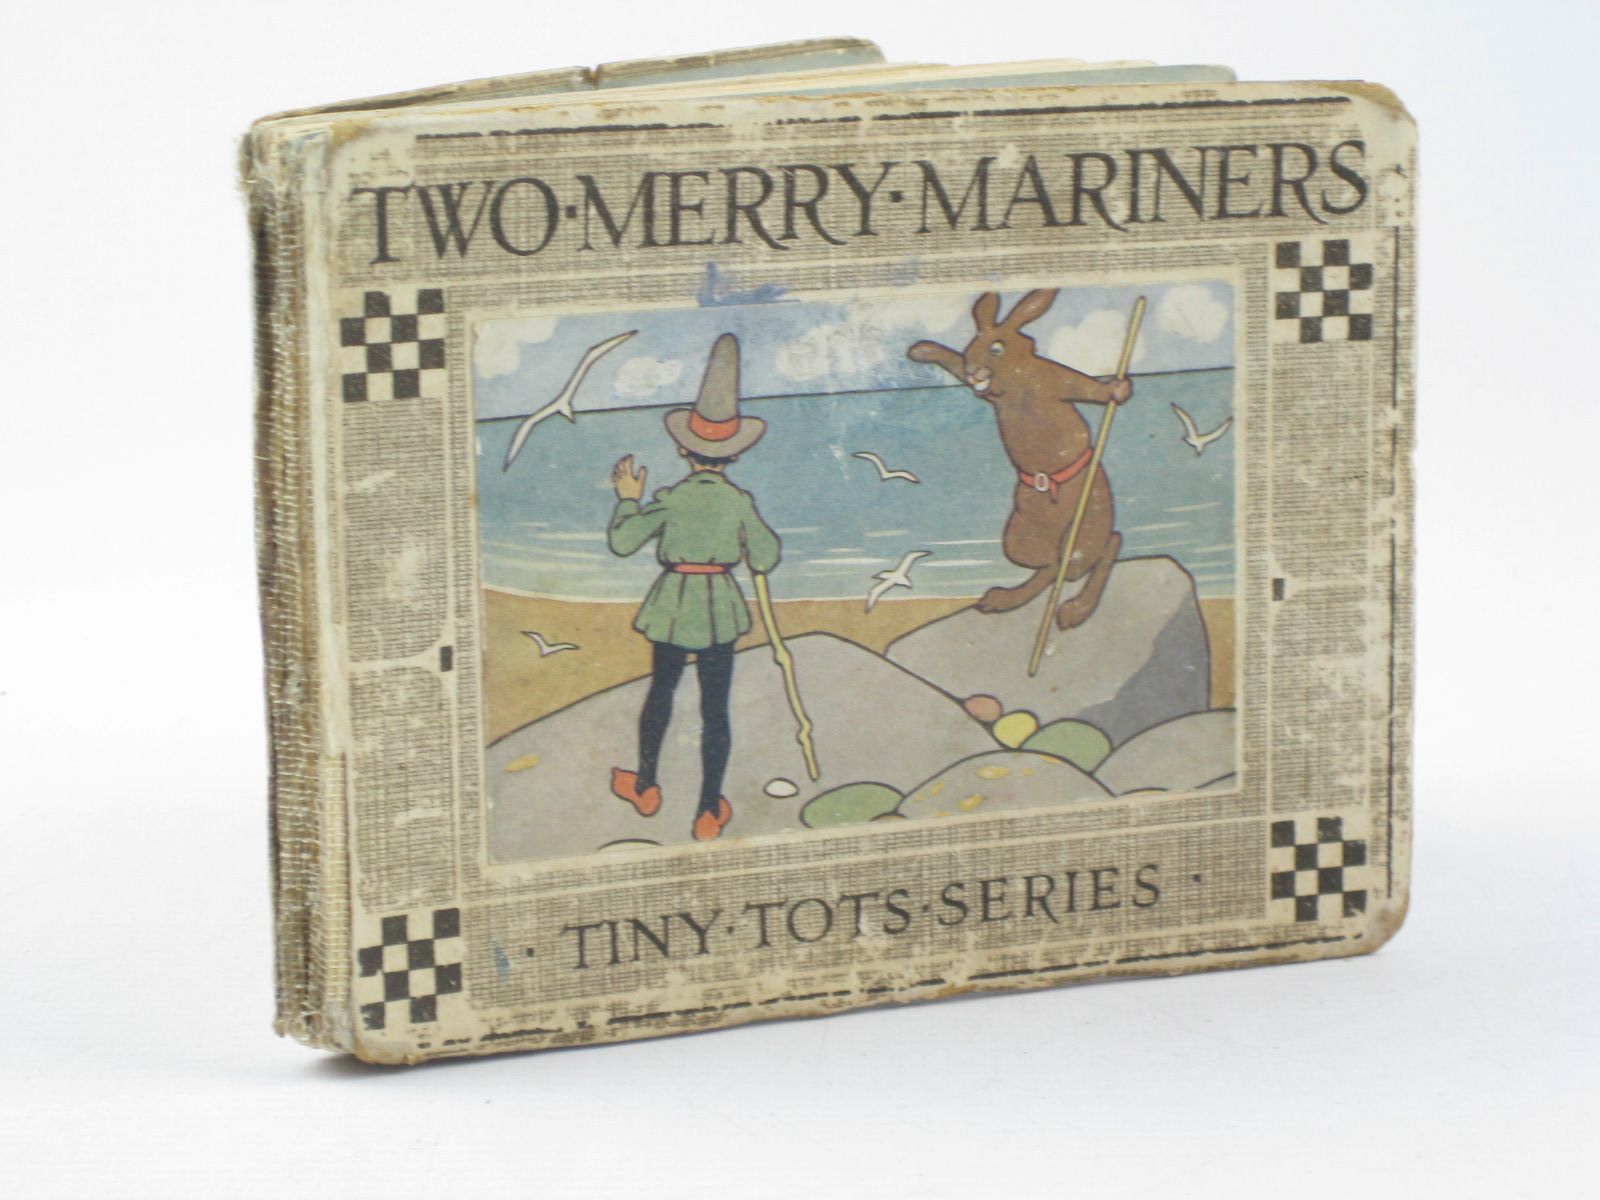 Photo of TWO MERRY MARINERS written by Brymer, John illustrated by Orr, Stewart published by Blackie &amp; Son Ltd. (STOCK CODE: 1402298)  for sale by Stella & Rose's Books